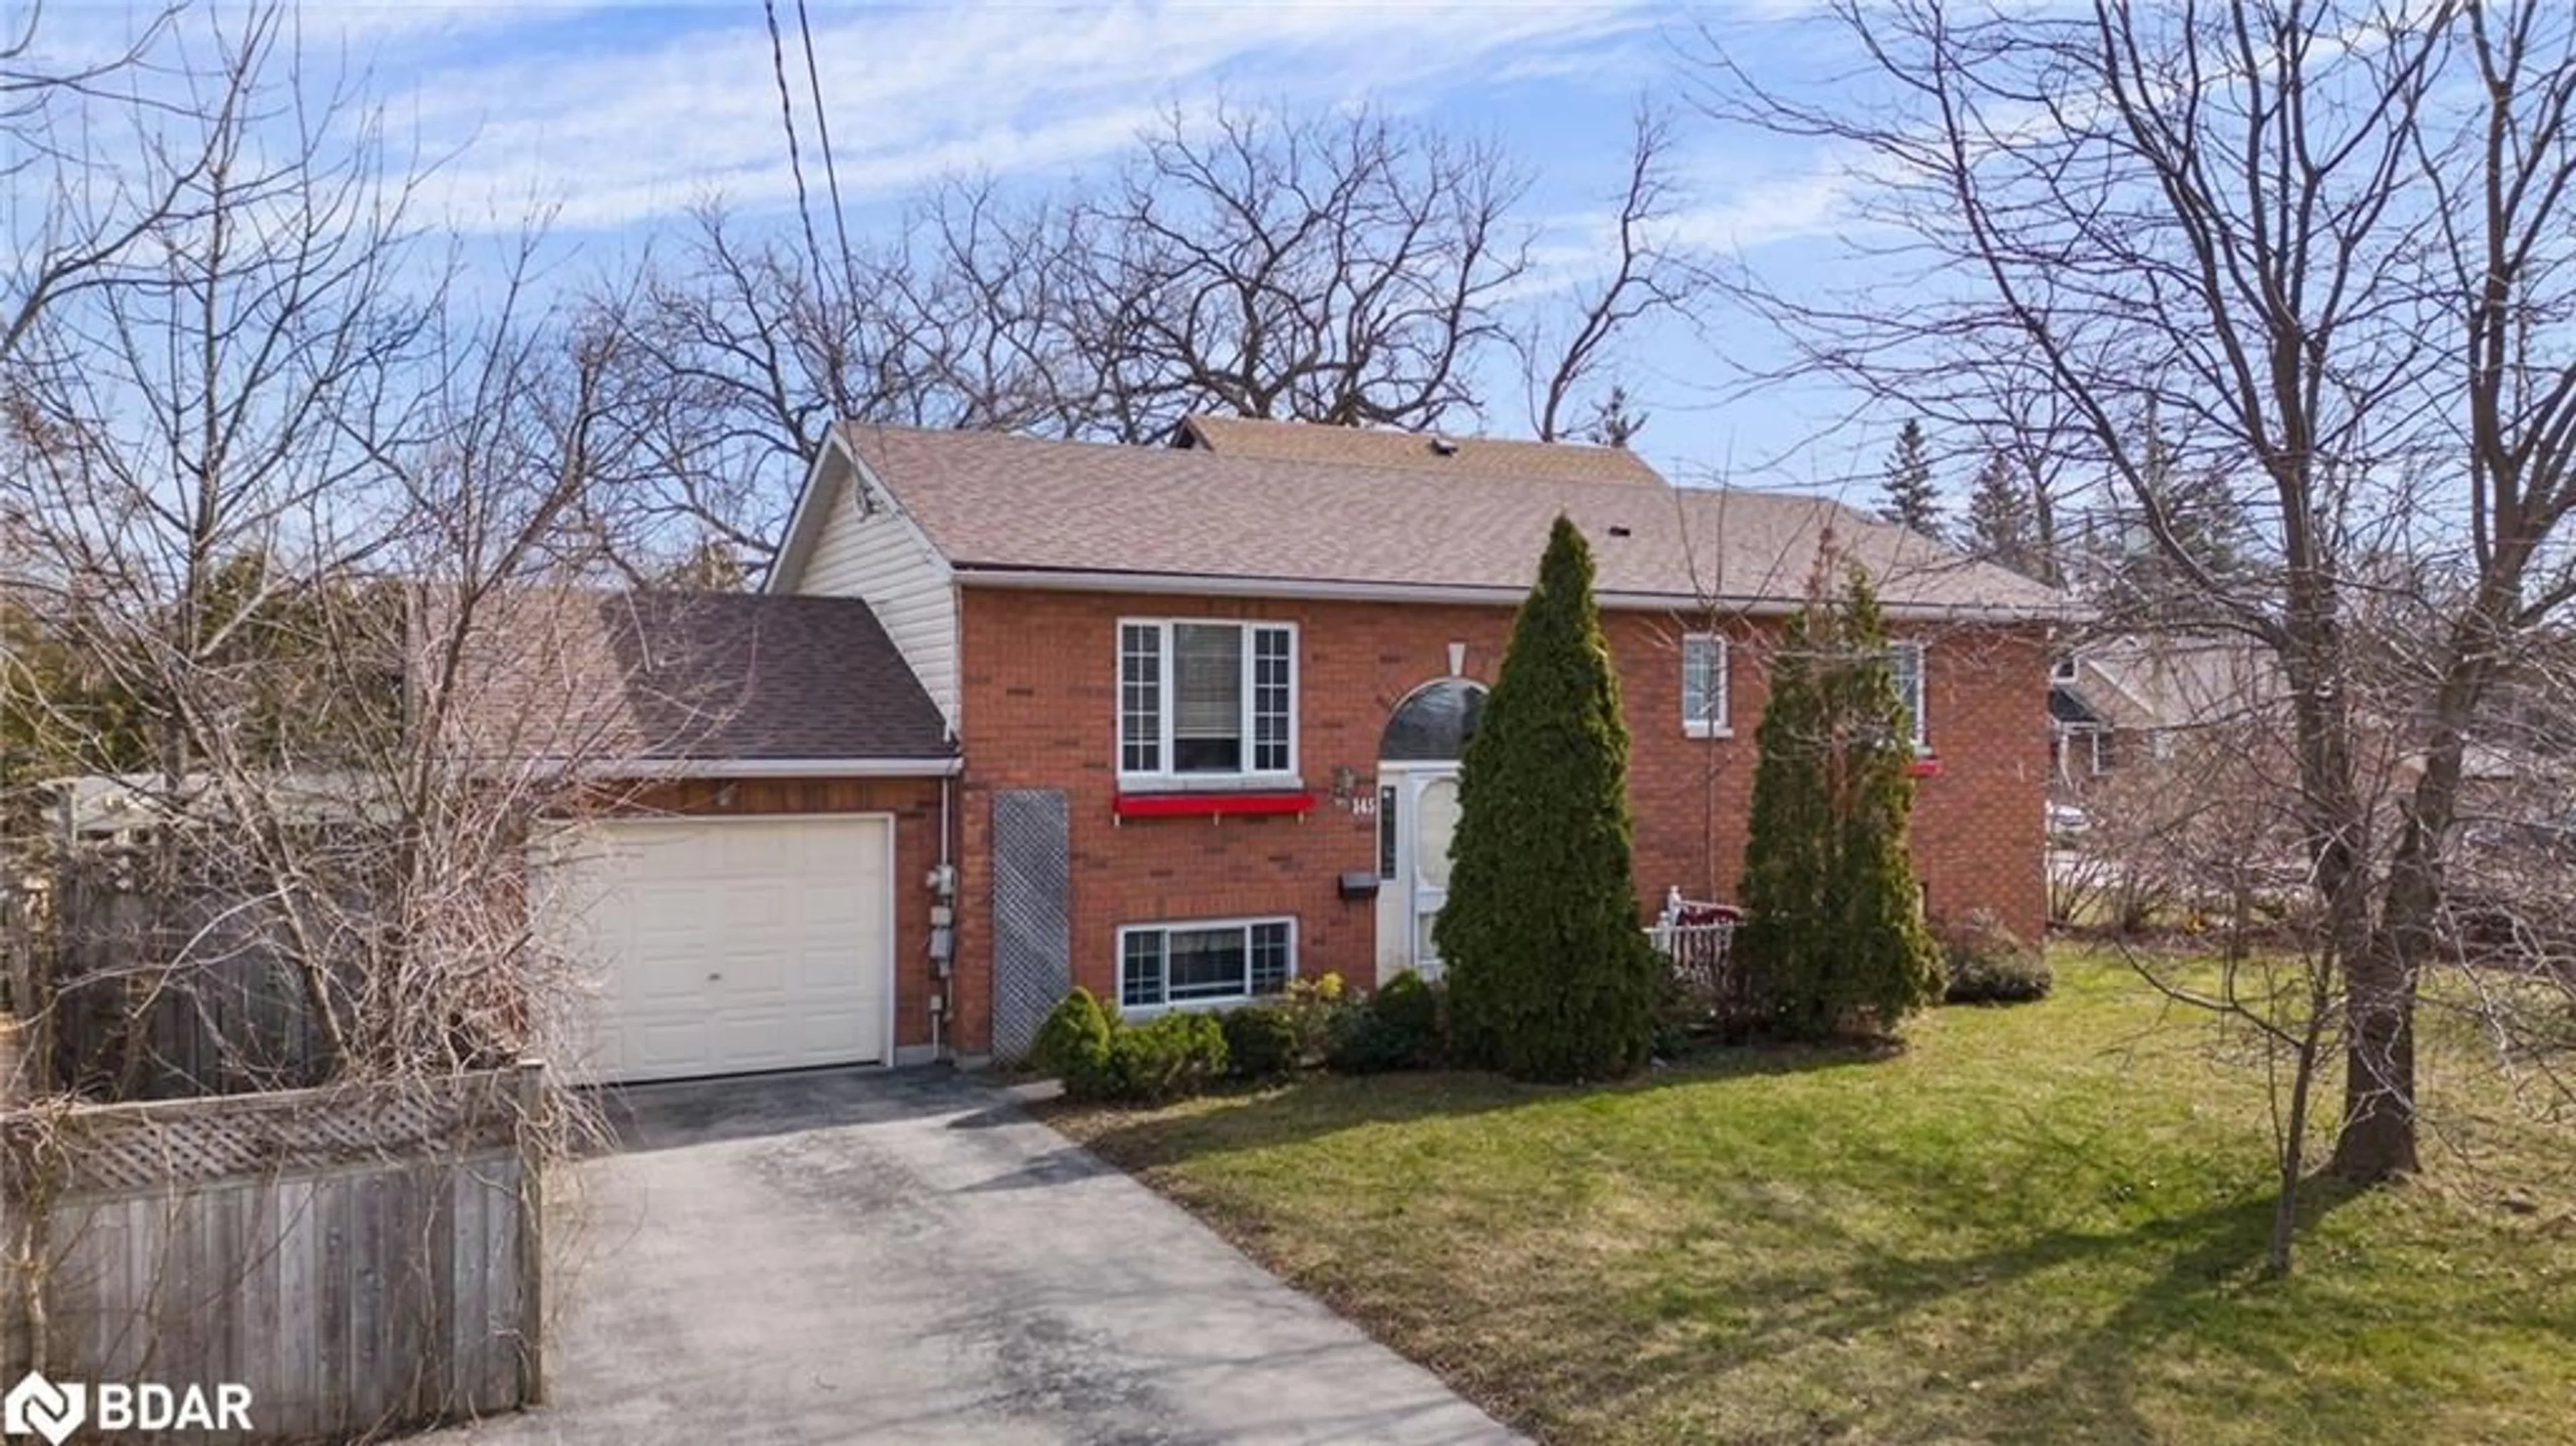 Frontside or backside of a home for 145 Spruce St, Collingwood Ontario L9Y 3G9